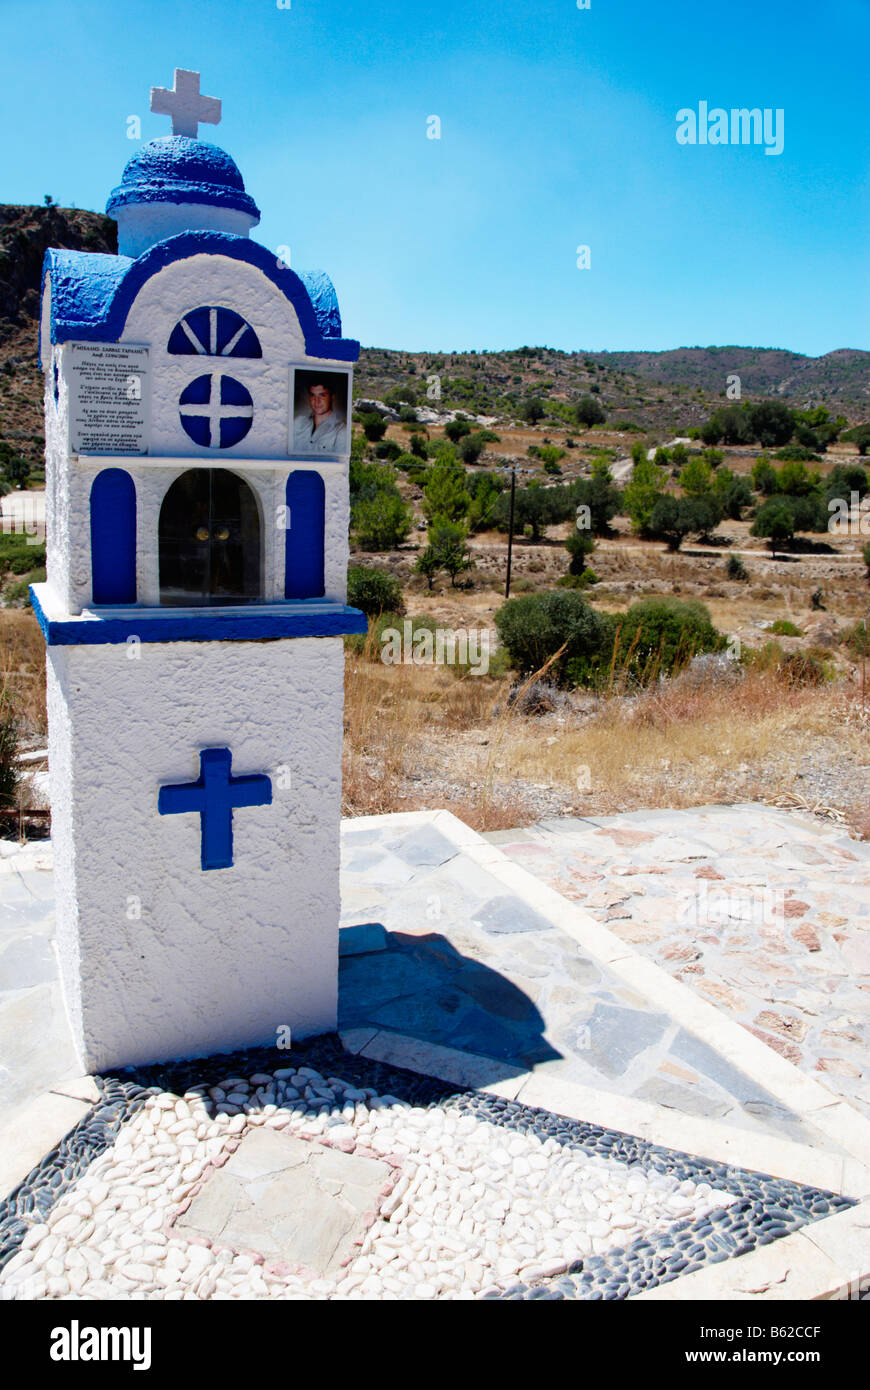 Memorial at roadside for victim of a road accident, Rhodes Island, Greece, Europe Stock Photo